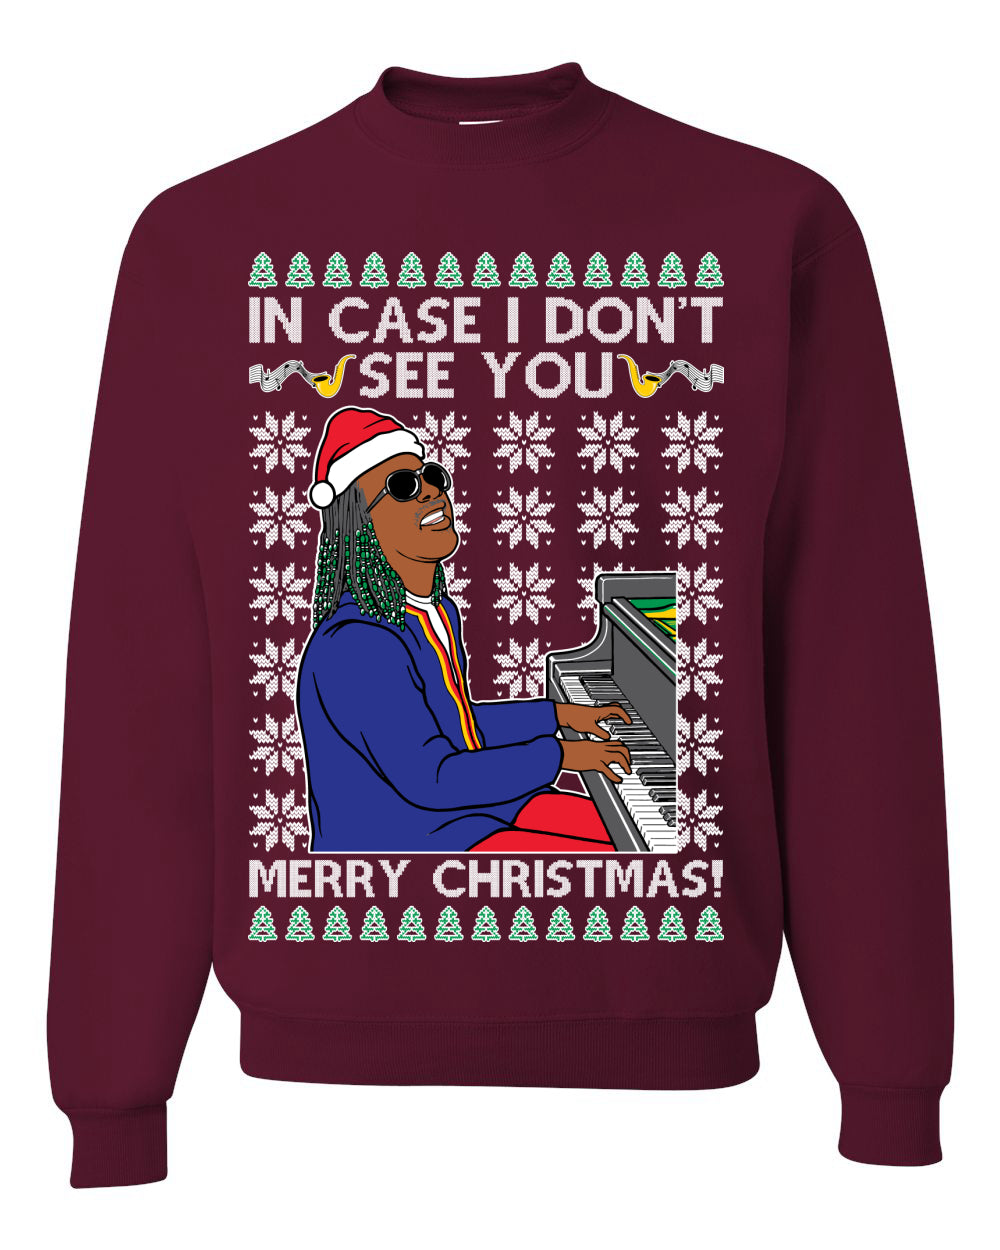 Stevie Wonder In Case I Don't See You Merry Xmas Ugly Christmas Sweater Unisex Crewneck Graphic Sweatshirt